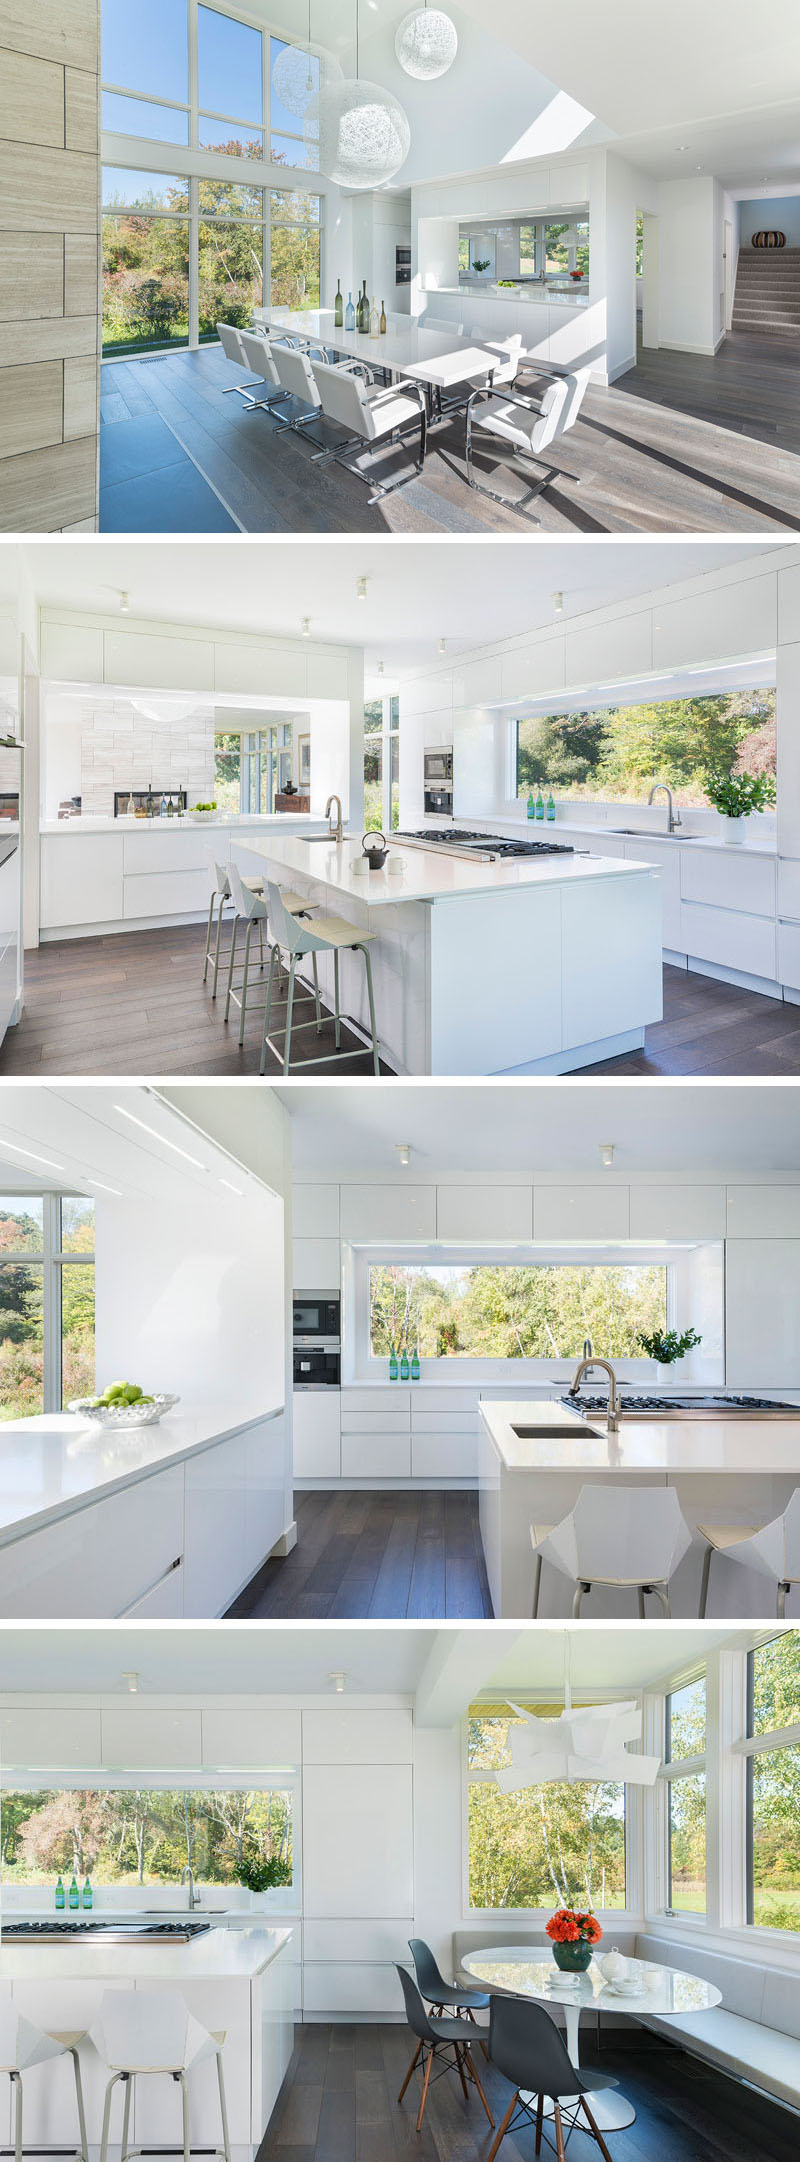 A pass-through window provides views from the dining room into this modern all-white kitchen that features a large window above the sink, a central island and a breakfast nook with a built-in corner bench.